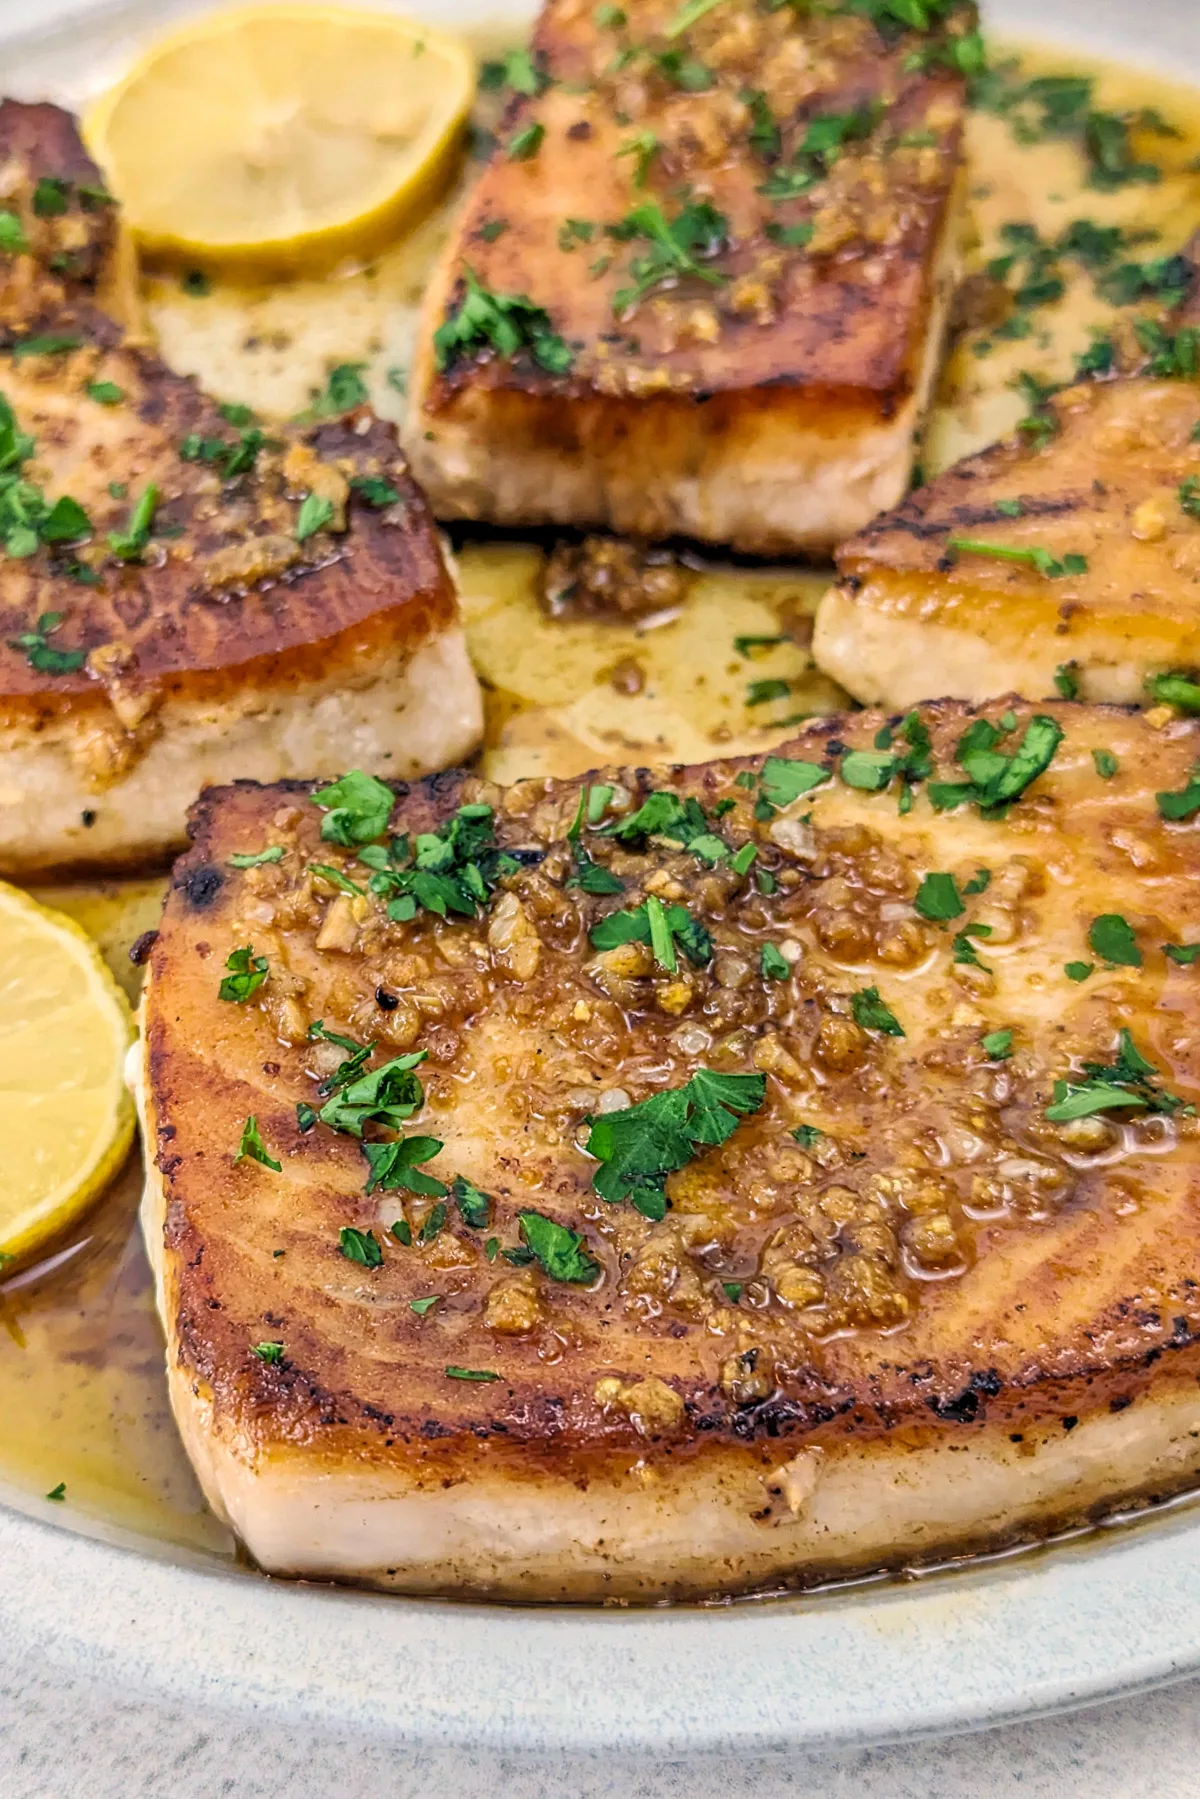 Fried swordfish on a plate with parsley.